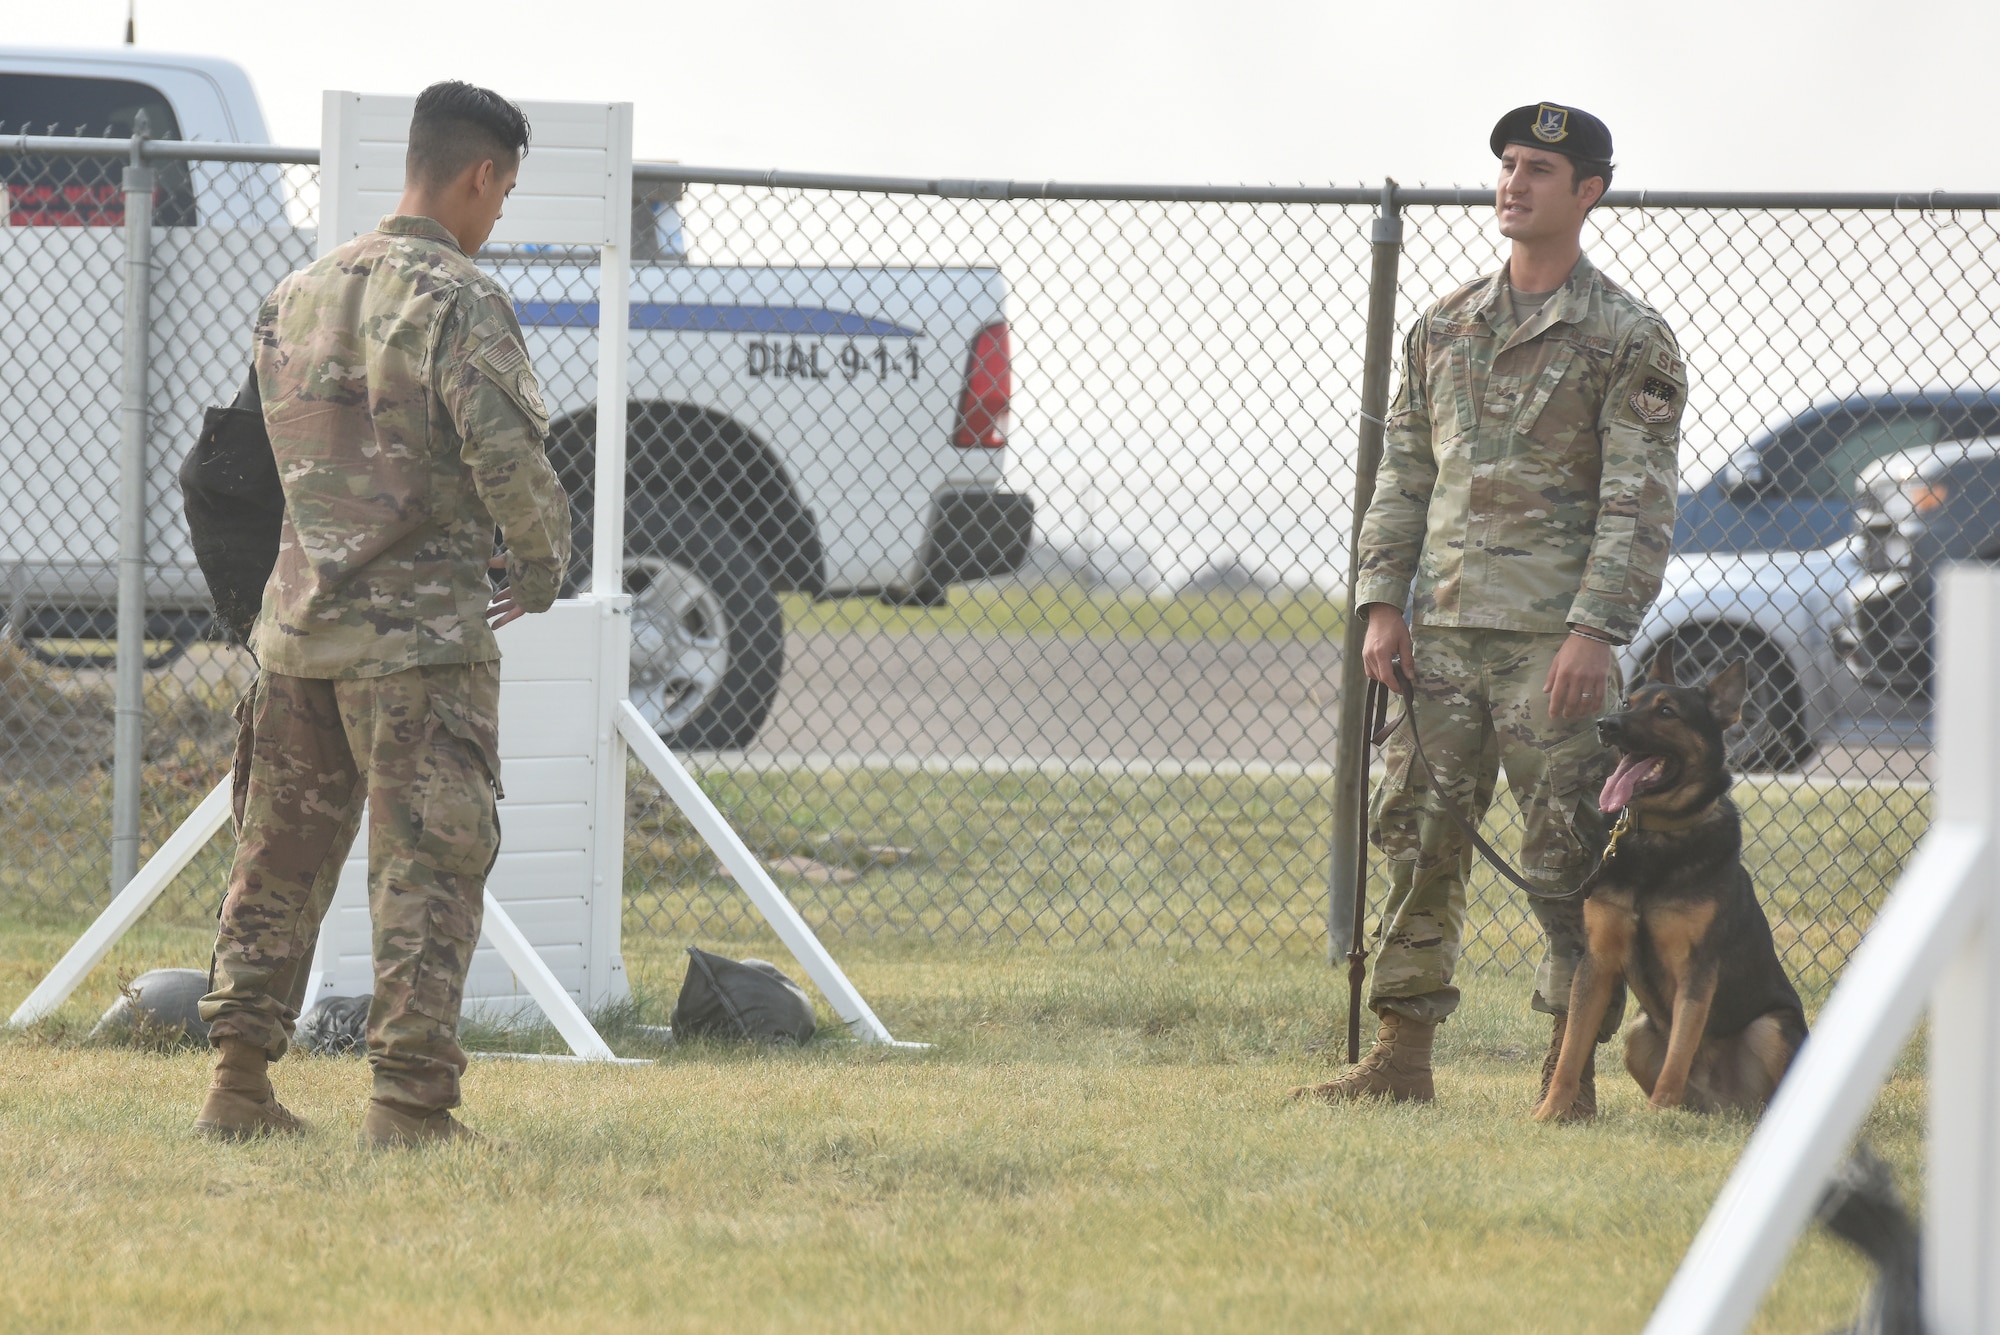 Senior Airman Dustin Sullivan, left, 341st Security Forces Squadron MWD handler, Staff Sgt. Zachary Seroogy, 341st SFS MWD handler, and MWD Paul, practice bite training Aug. 20, 2020, at Malmstrom Air Force Base, Mont.